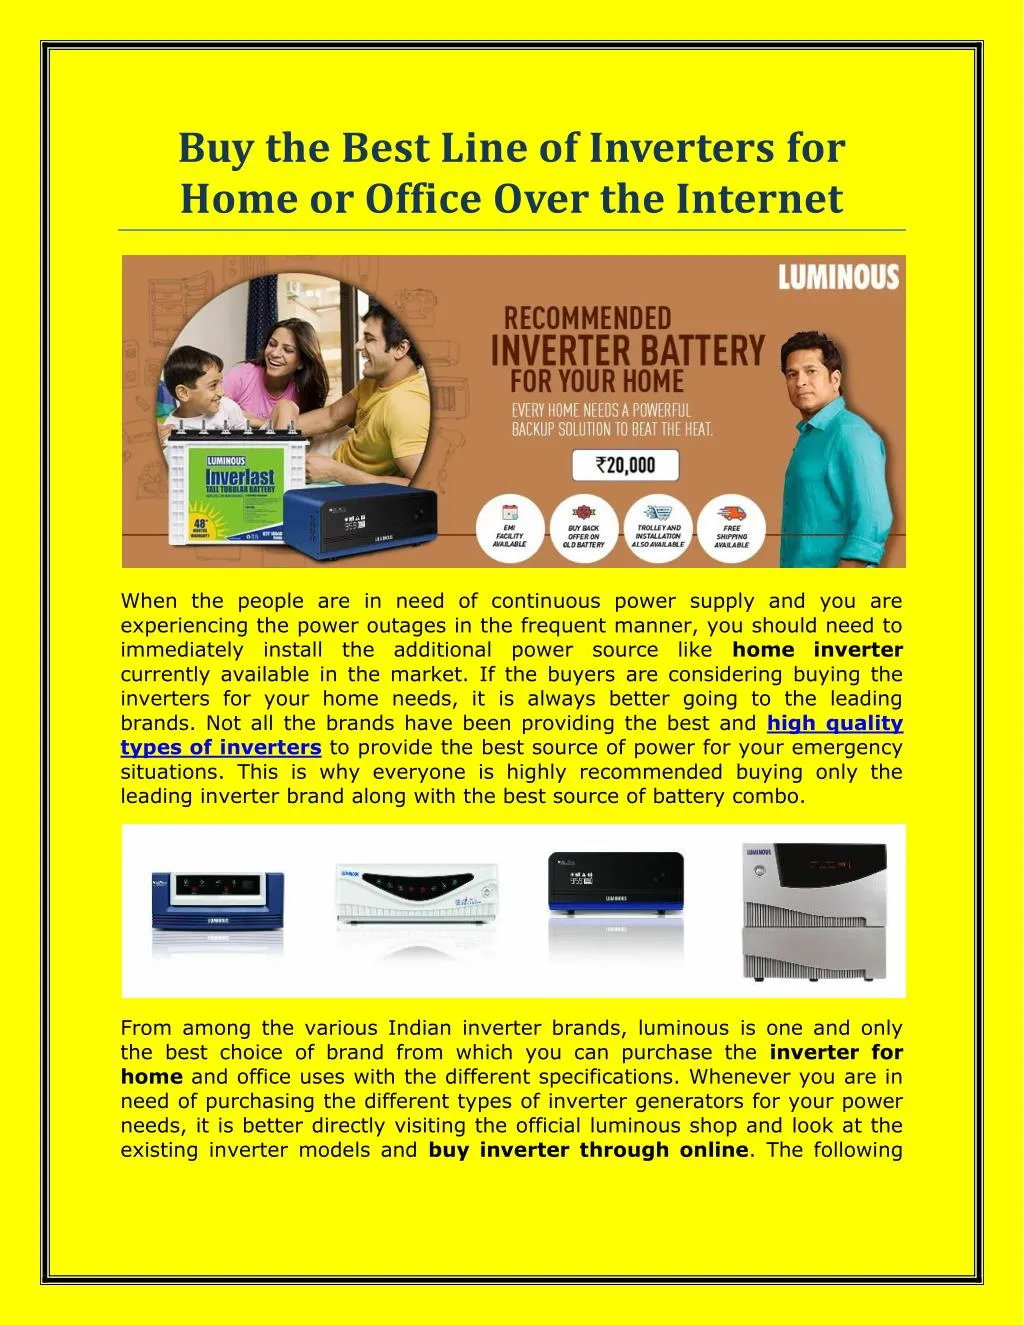 buy the best line of inverters for home or office